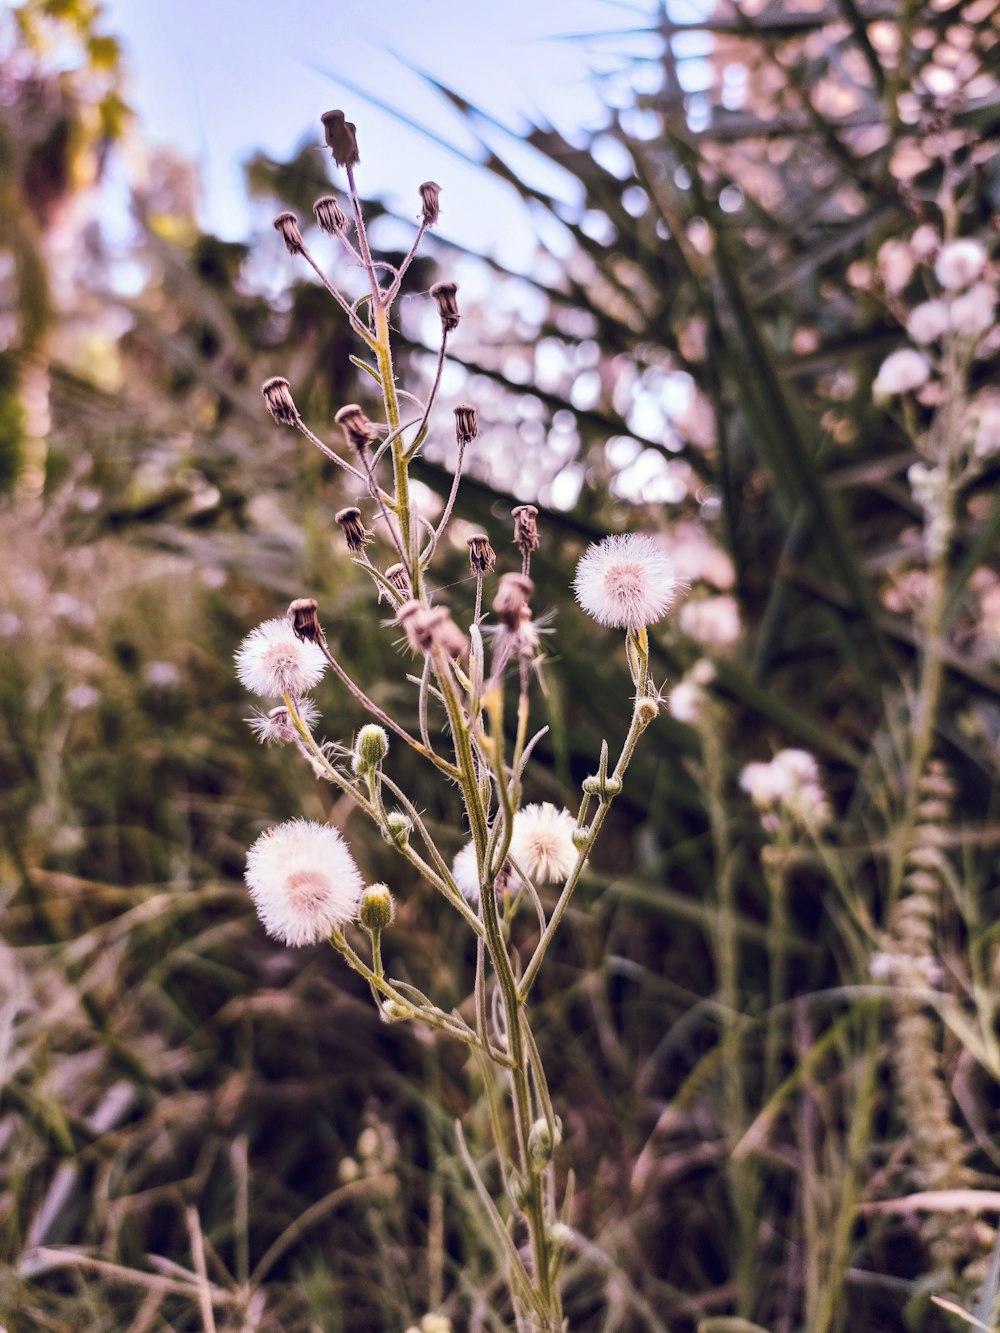 a close up of a plant with lots of flowers